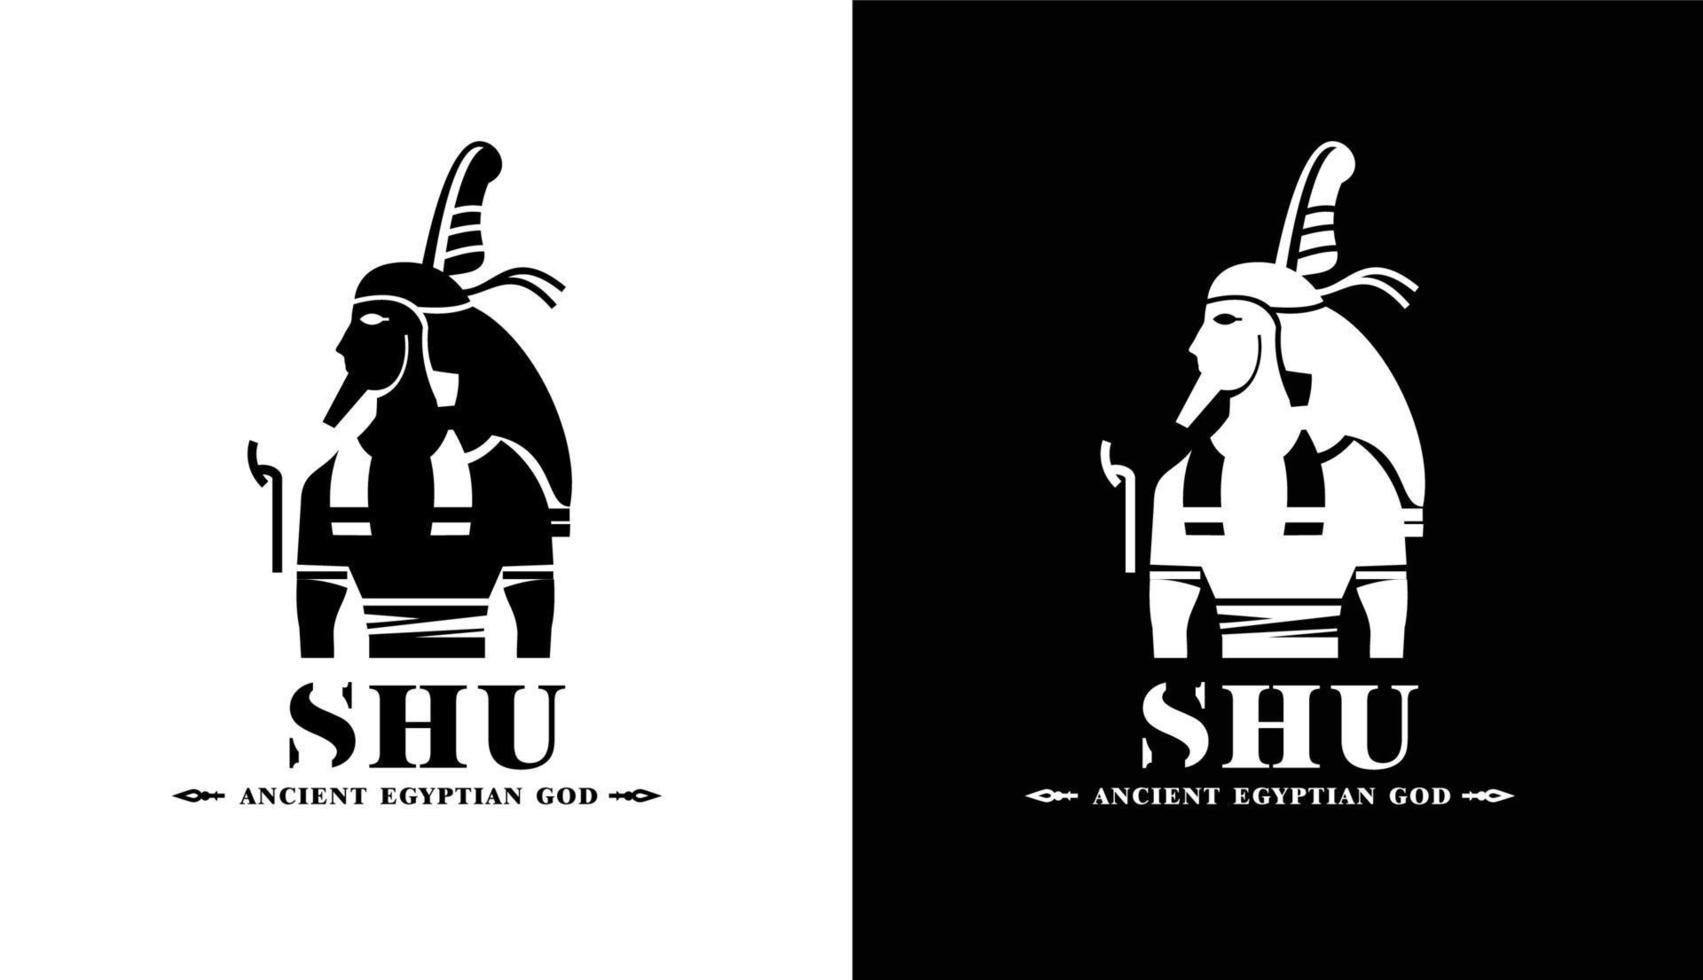 Silhouette of ancient egypt wind god shu, middle east ruler with crown and death symbol vector